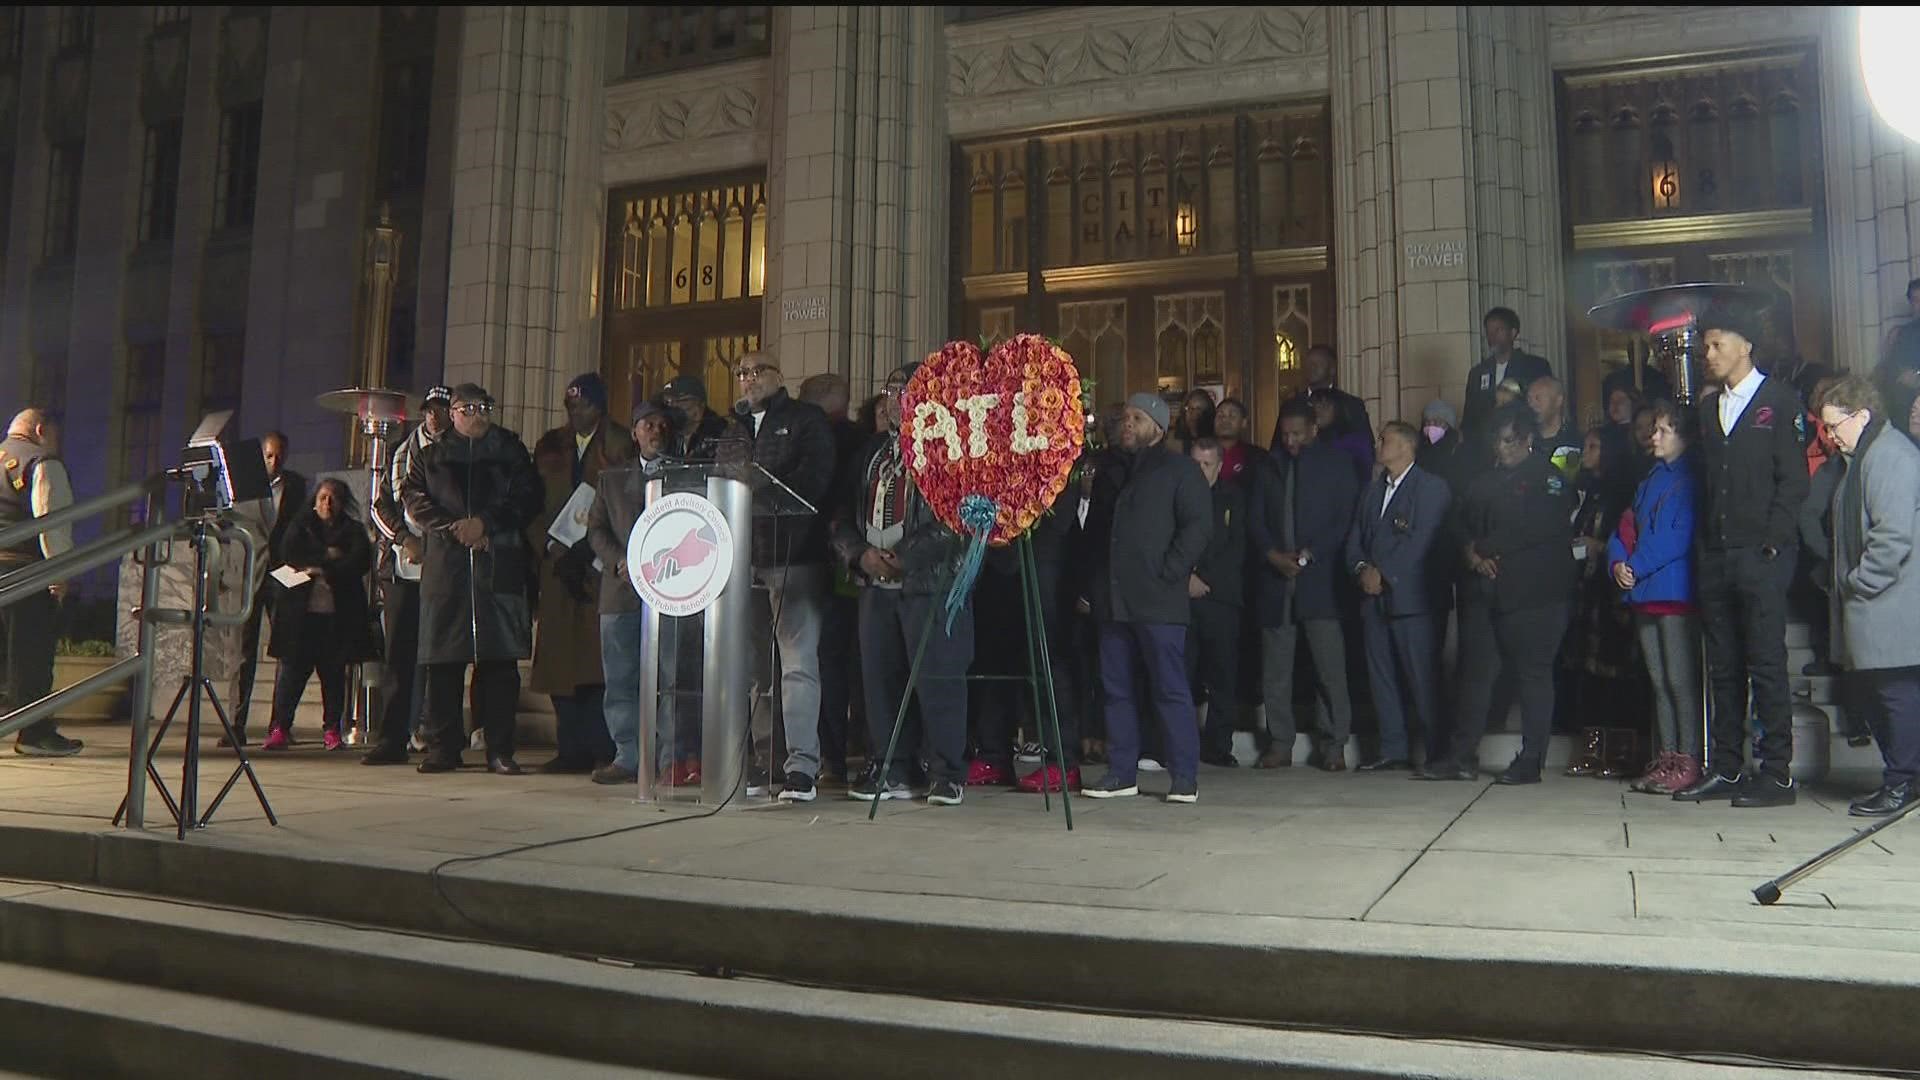 High school students rallied outside Atlanta City Hall to tell the mayor, police chief and other city leaders their demands for ending violent crimes.